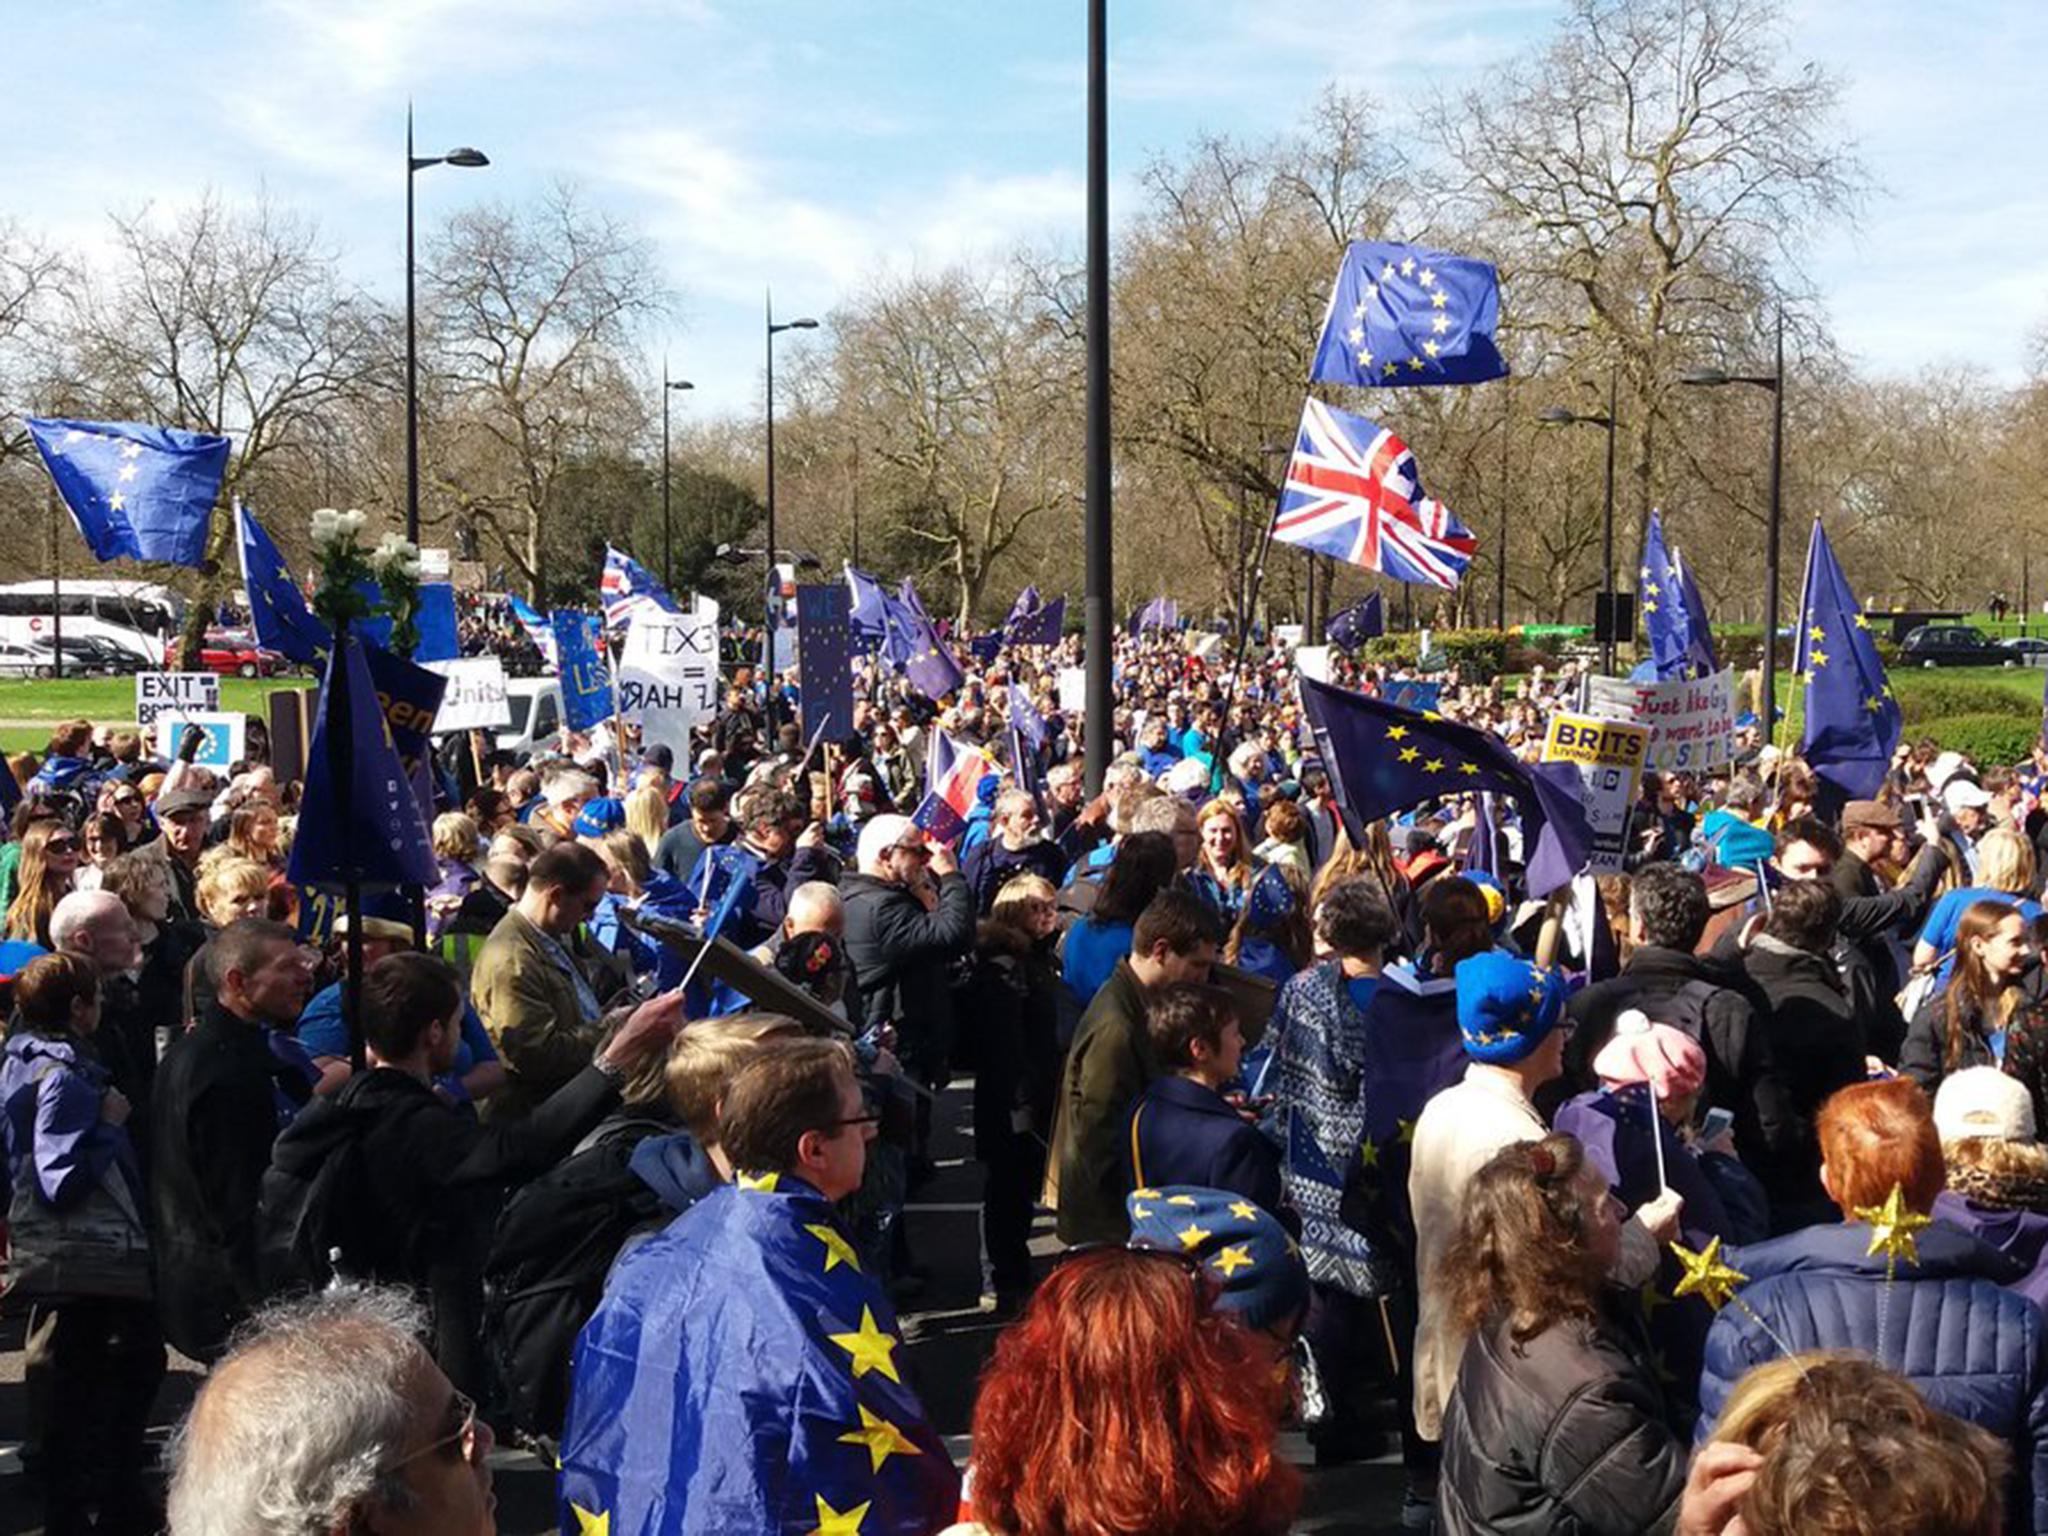 Tens of thousands joined the the Unite for Europe march in central London